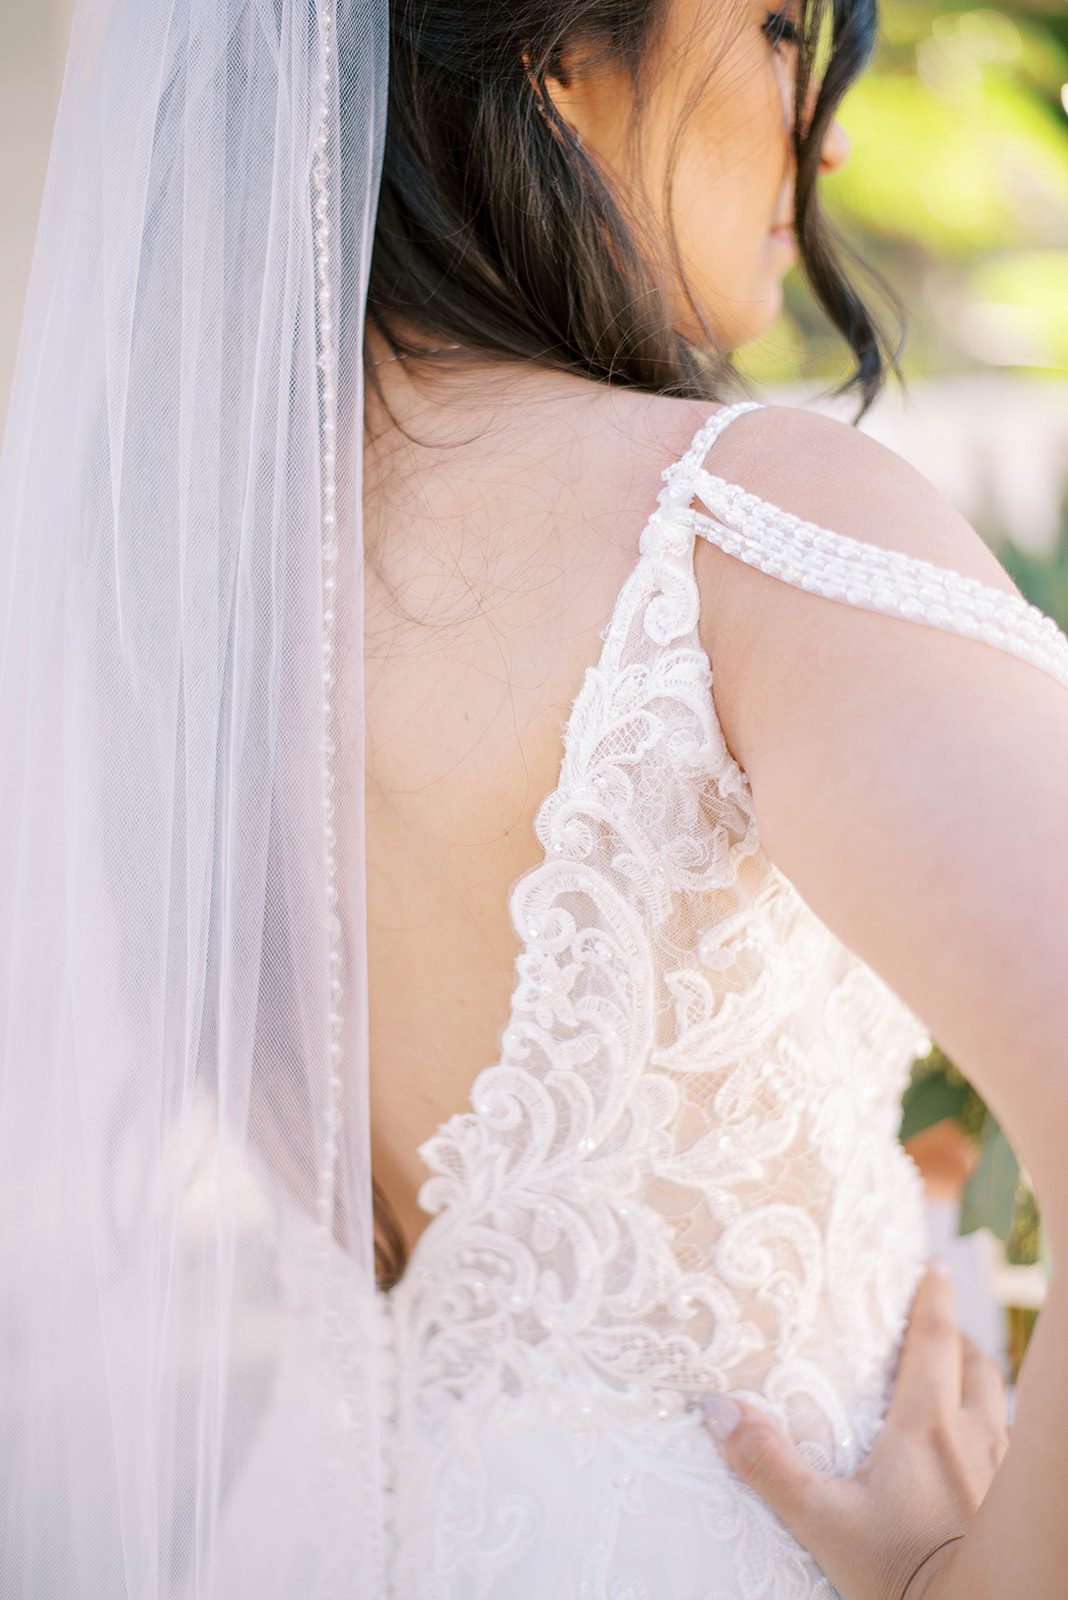 detail shot of the back of Tampa Bay brides wedding dress with the lace of the gown and the long veil being the subject of the image